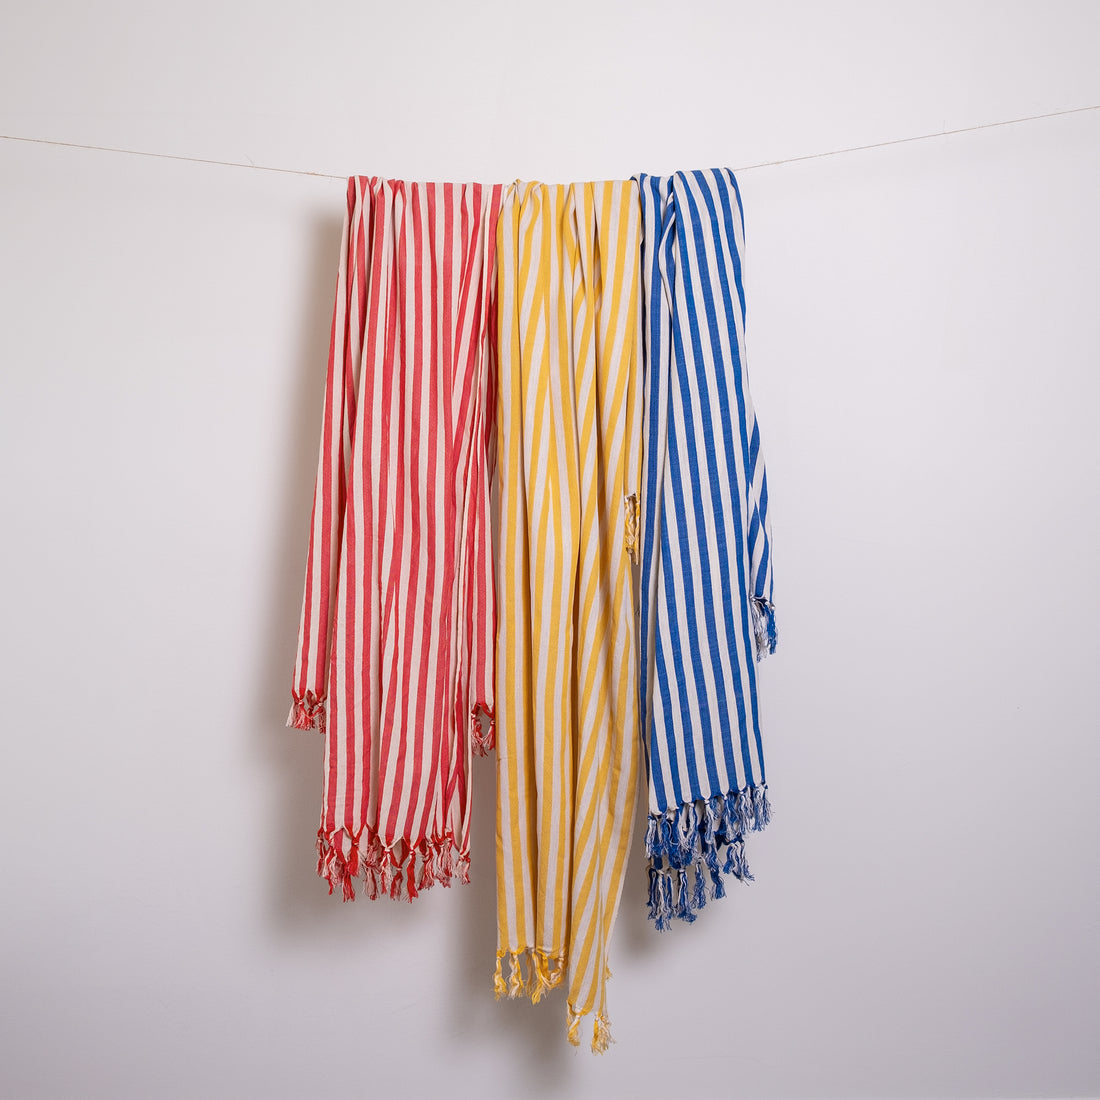 Darling Spring-Coral Stripe Turkish Towel -Hanging -Red and White stripes